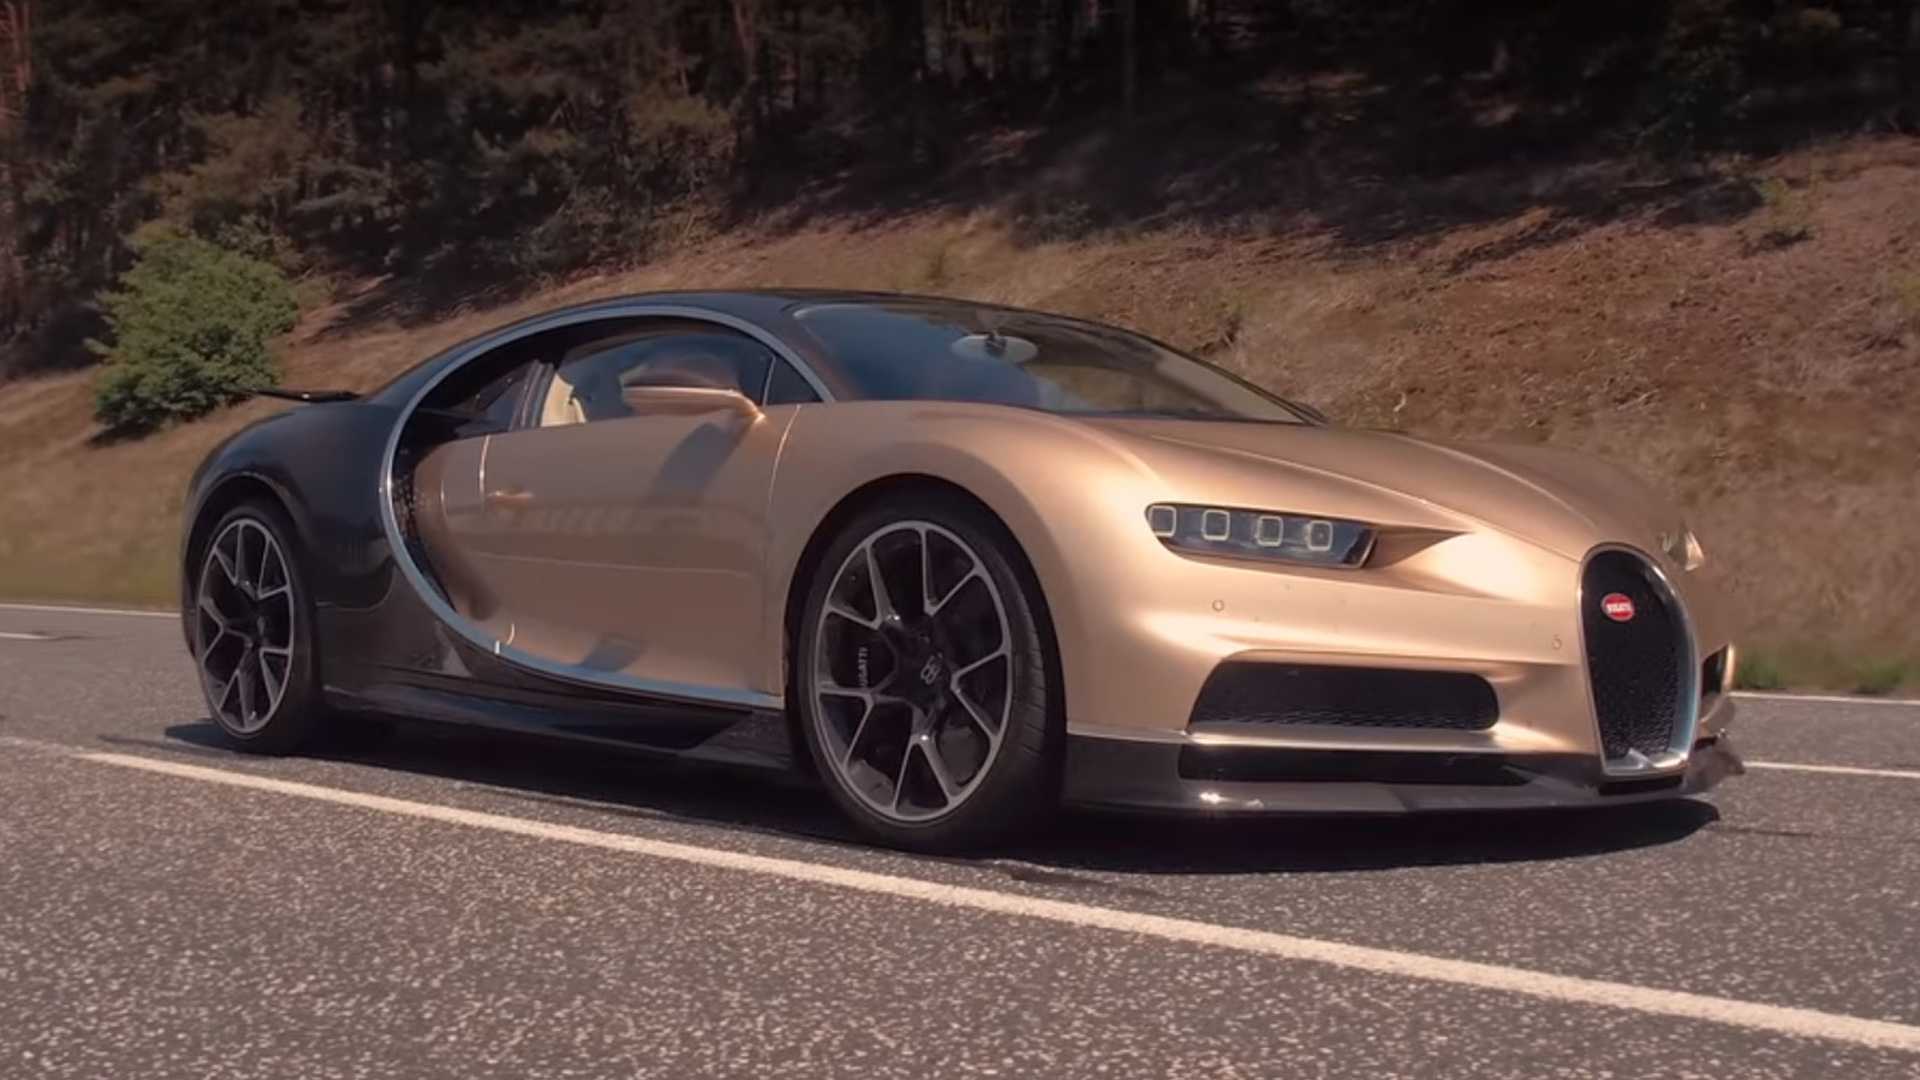 See Bugatti Chiron Easily Reach 261 MPH In New Video Series